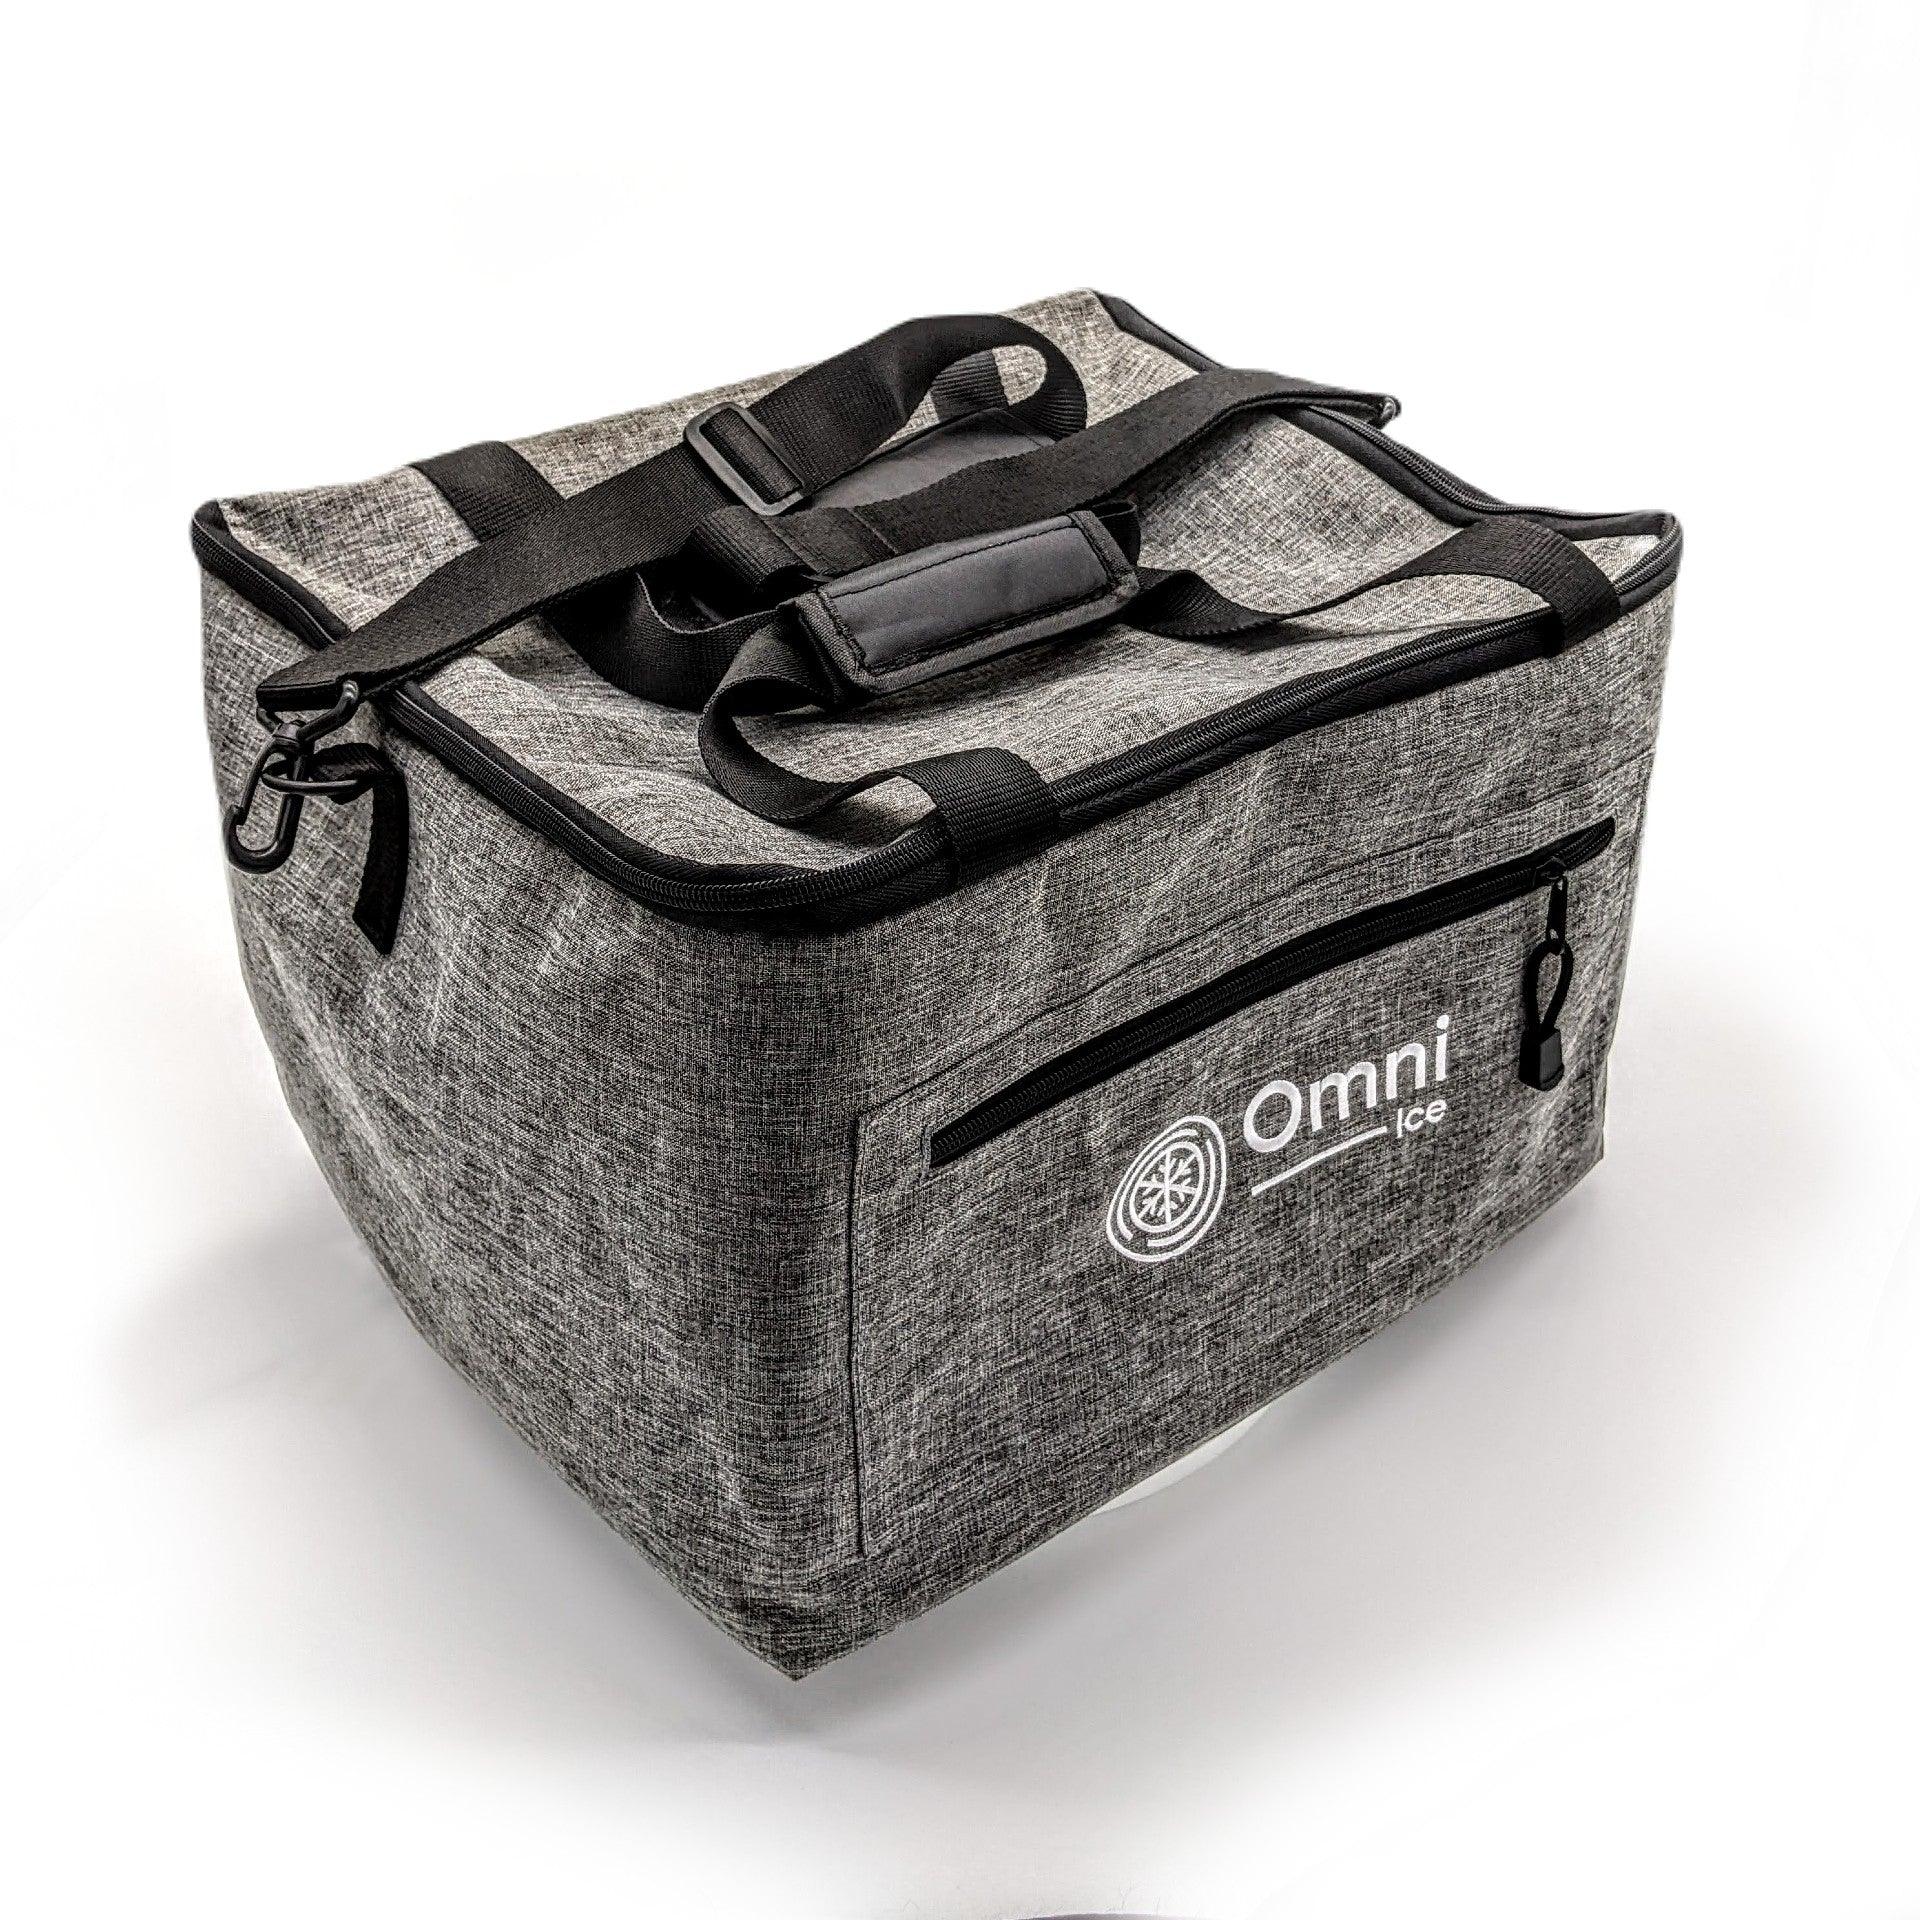 Cold Therapy Multi-Use Carry Bag by Vive Health from 39.99 at Supply  Physical Therapy ⭐❄ – My Cold Therapy